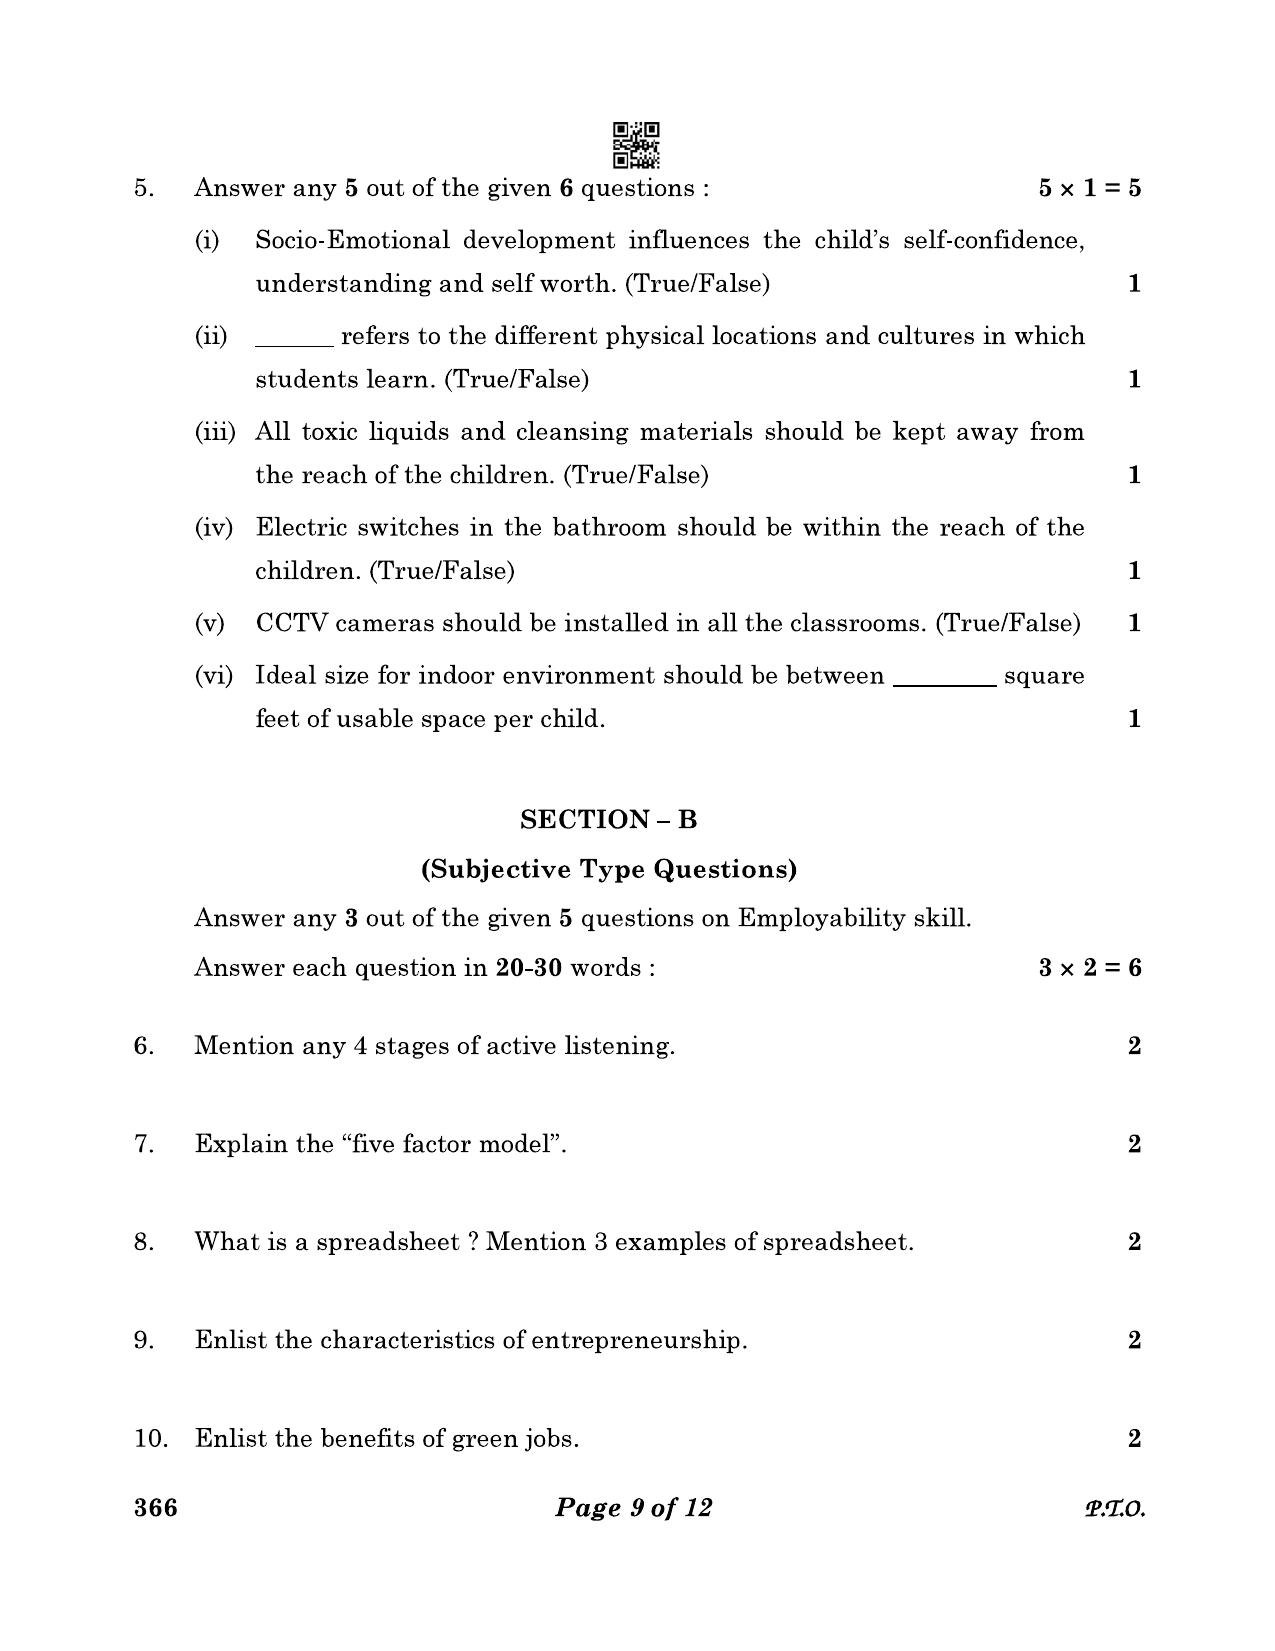 CBSE Class 12 366_Early Childhood Care & Education 2023 Question Paper - Page 9